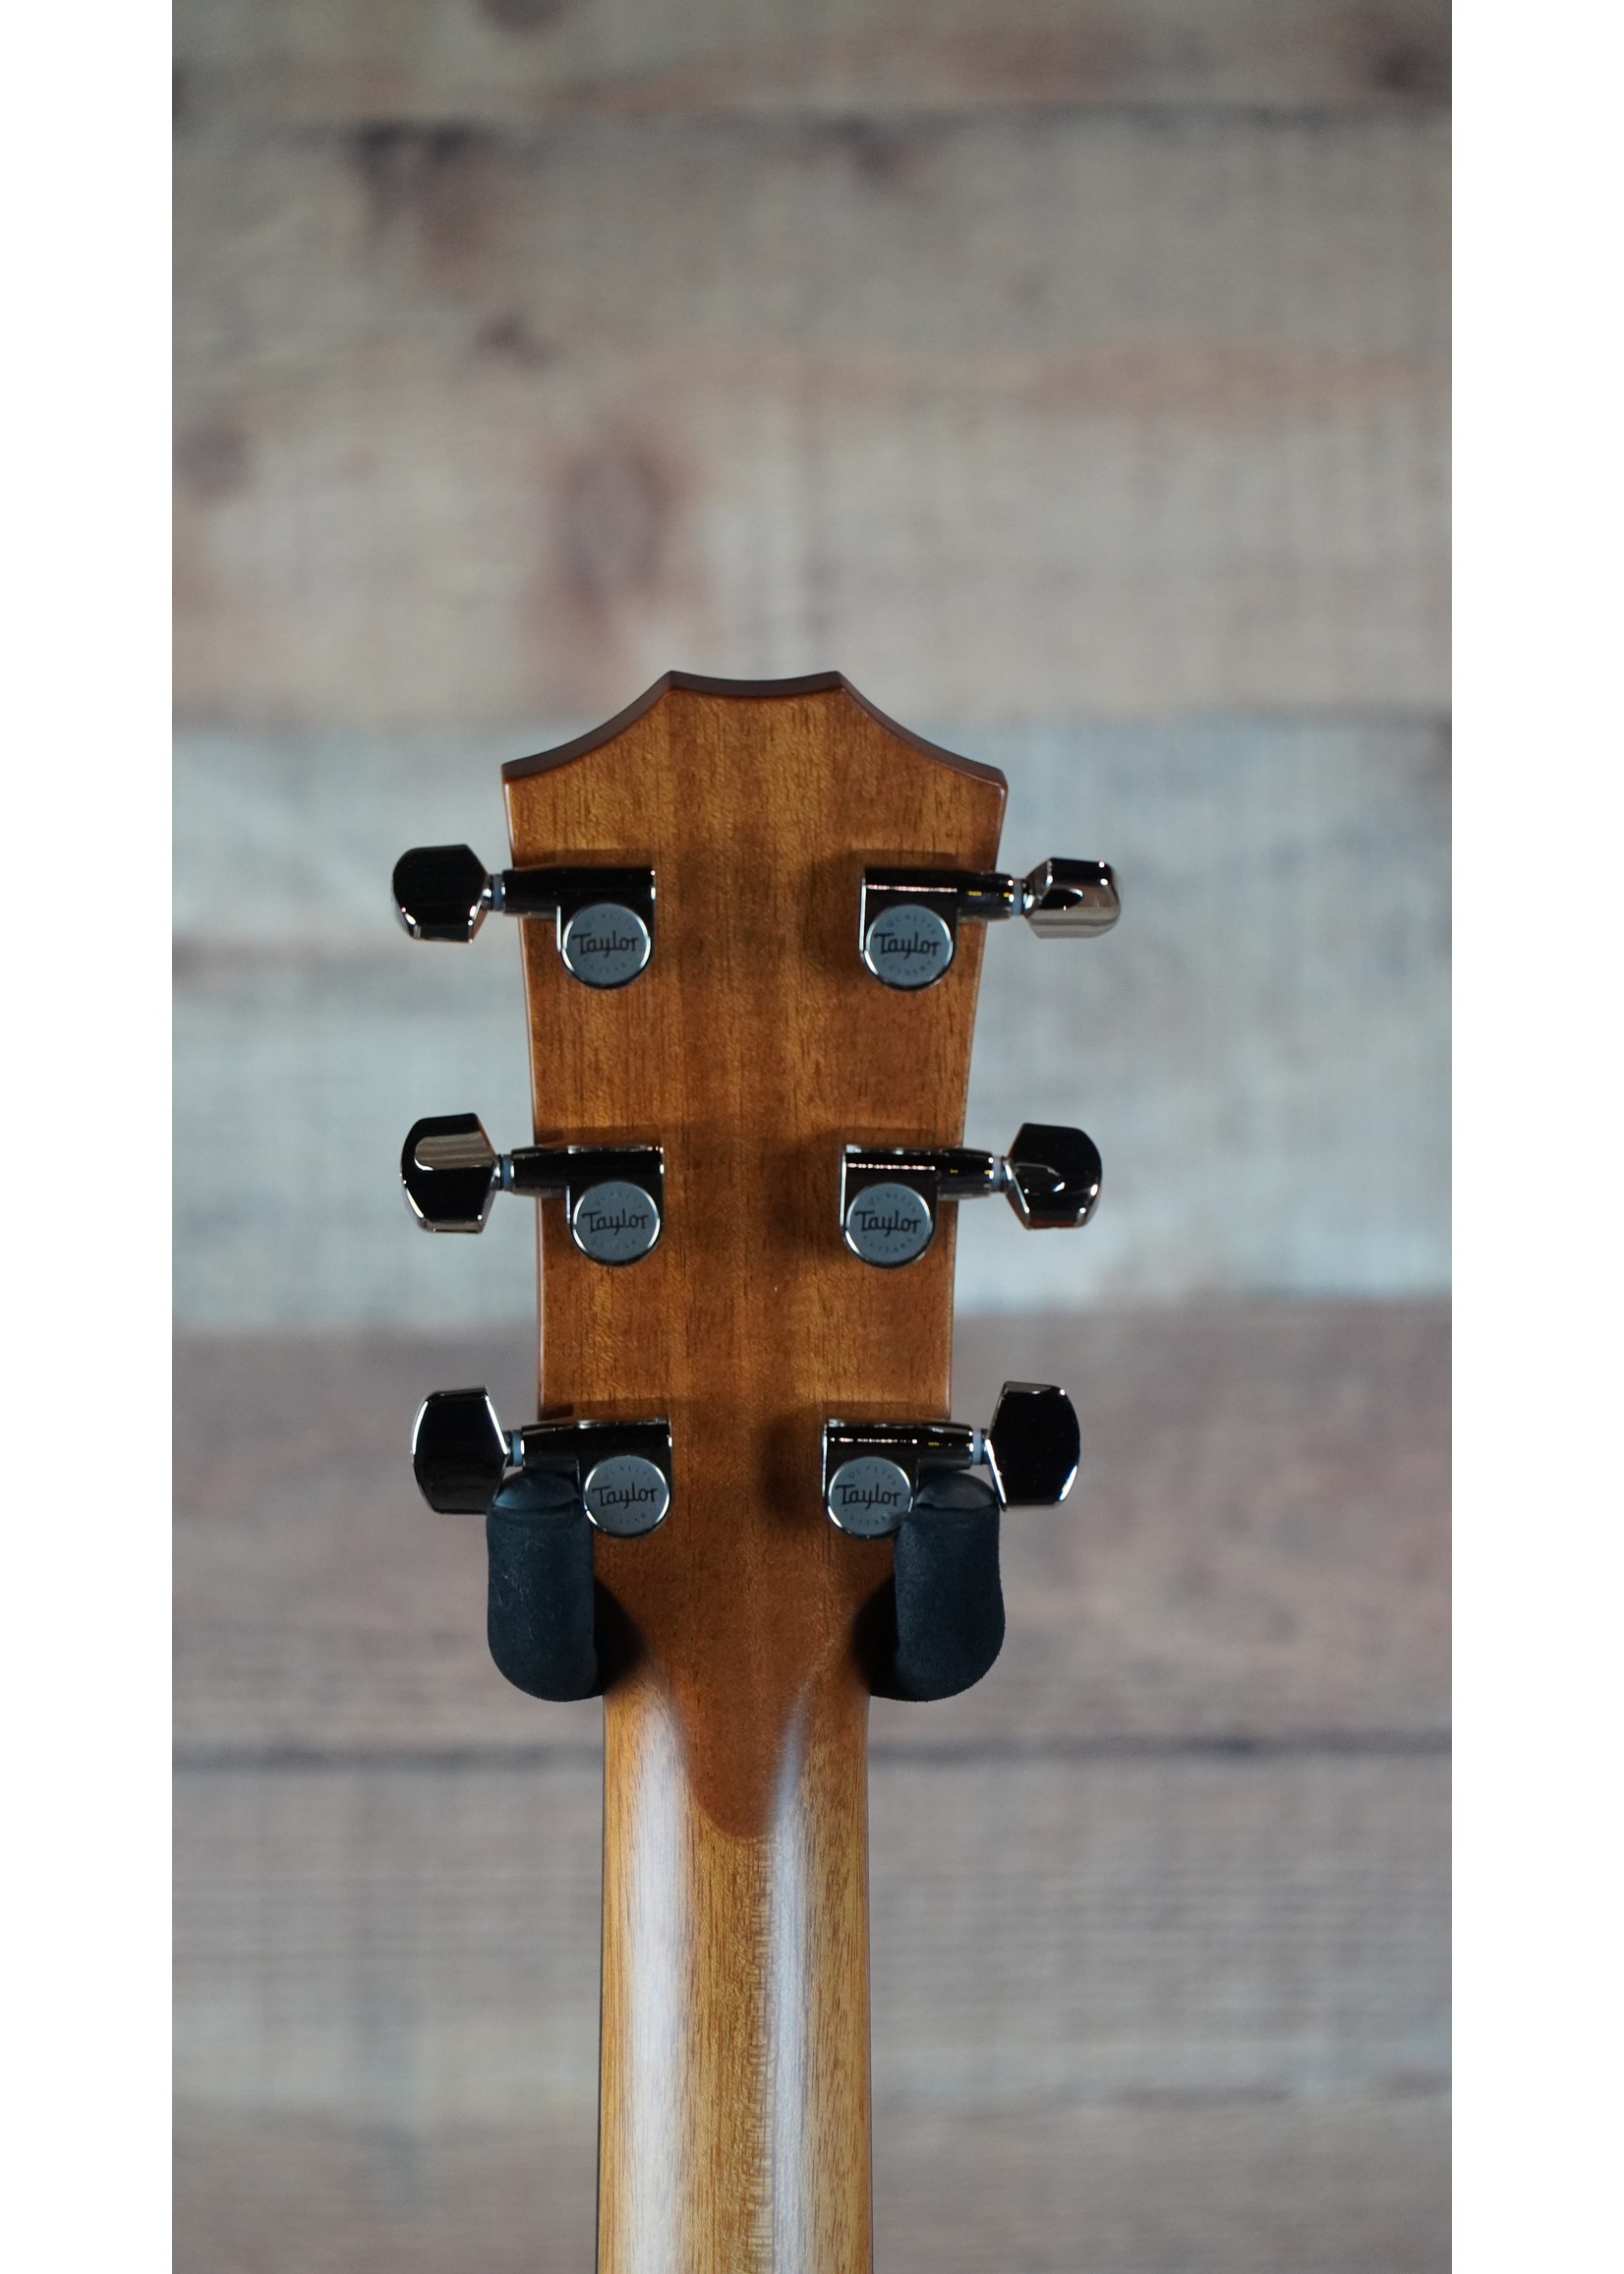 Taylor Taylor 6-String | Sitka Spruce Top | Urban Ironbark Back and Sides | Tropical Mahogany Neck | West African Crelicam Ebony Fretboard | Expression System® 2 Electronics | Venetian Cutaway | Taylor Deluxe Hardshell Brown Case